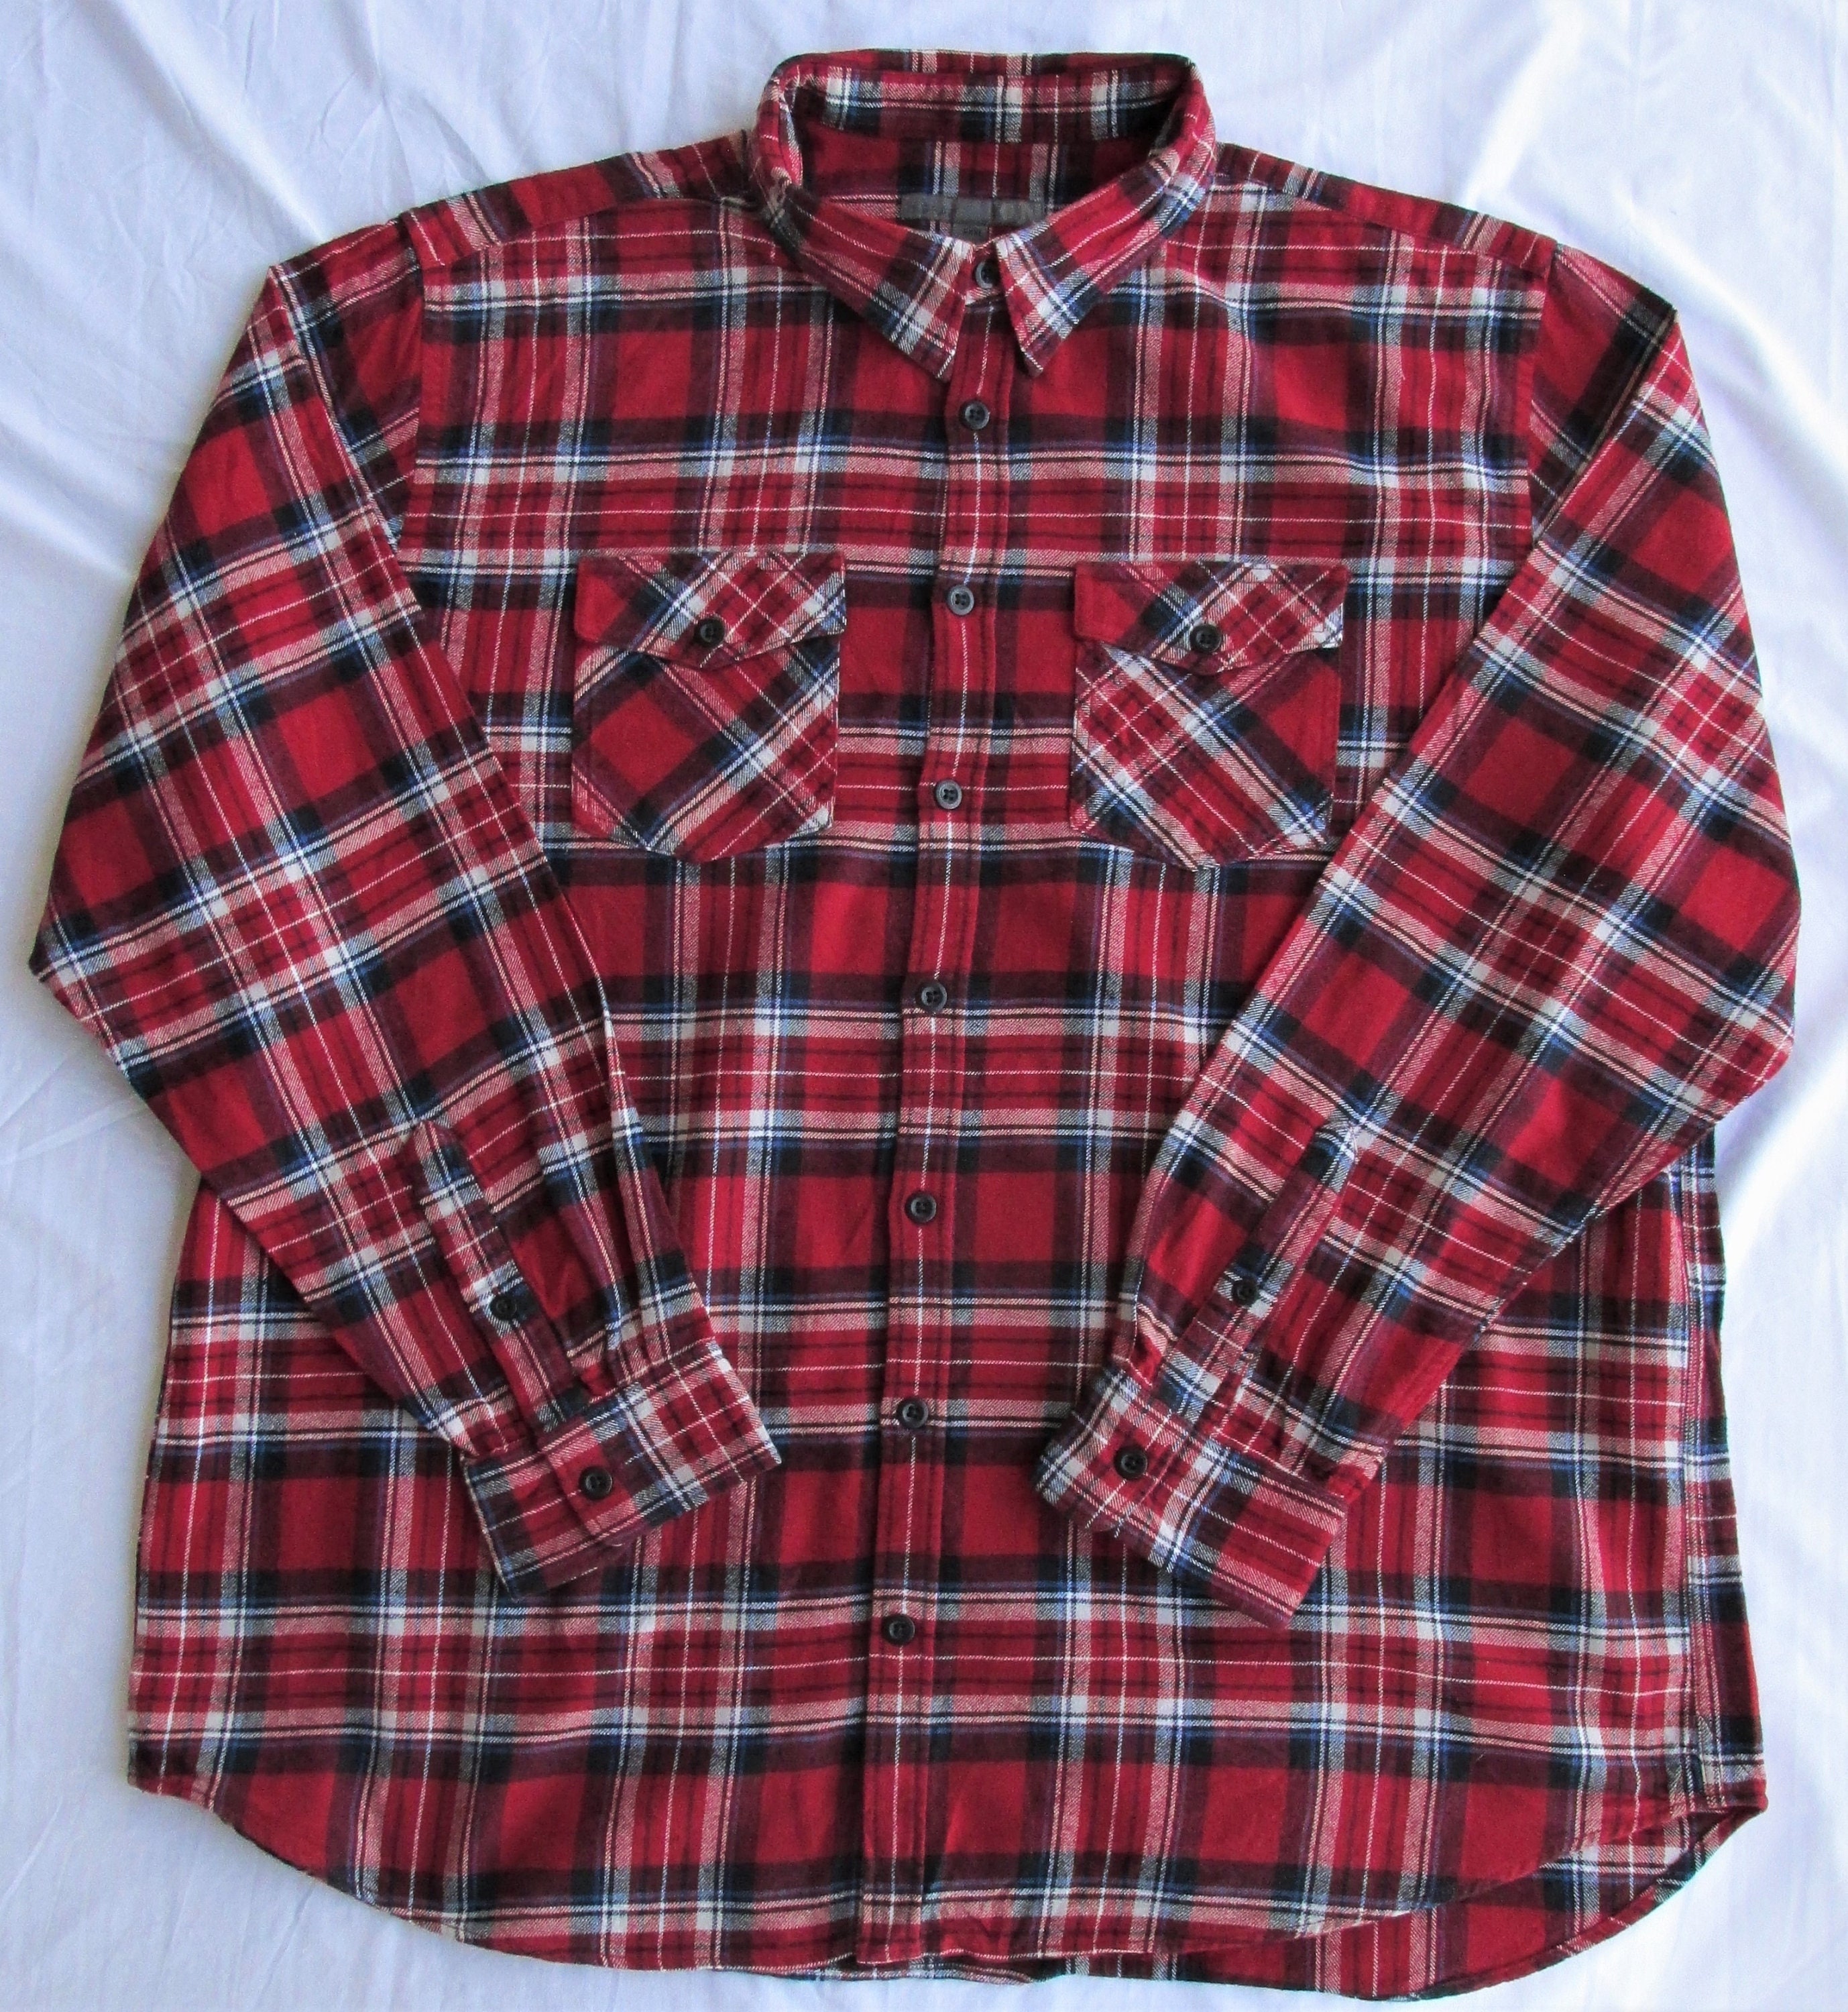 Old Navy Men's Cotton Flannel Shirt Size 3XL - Etsy